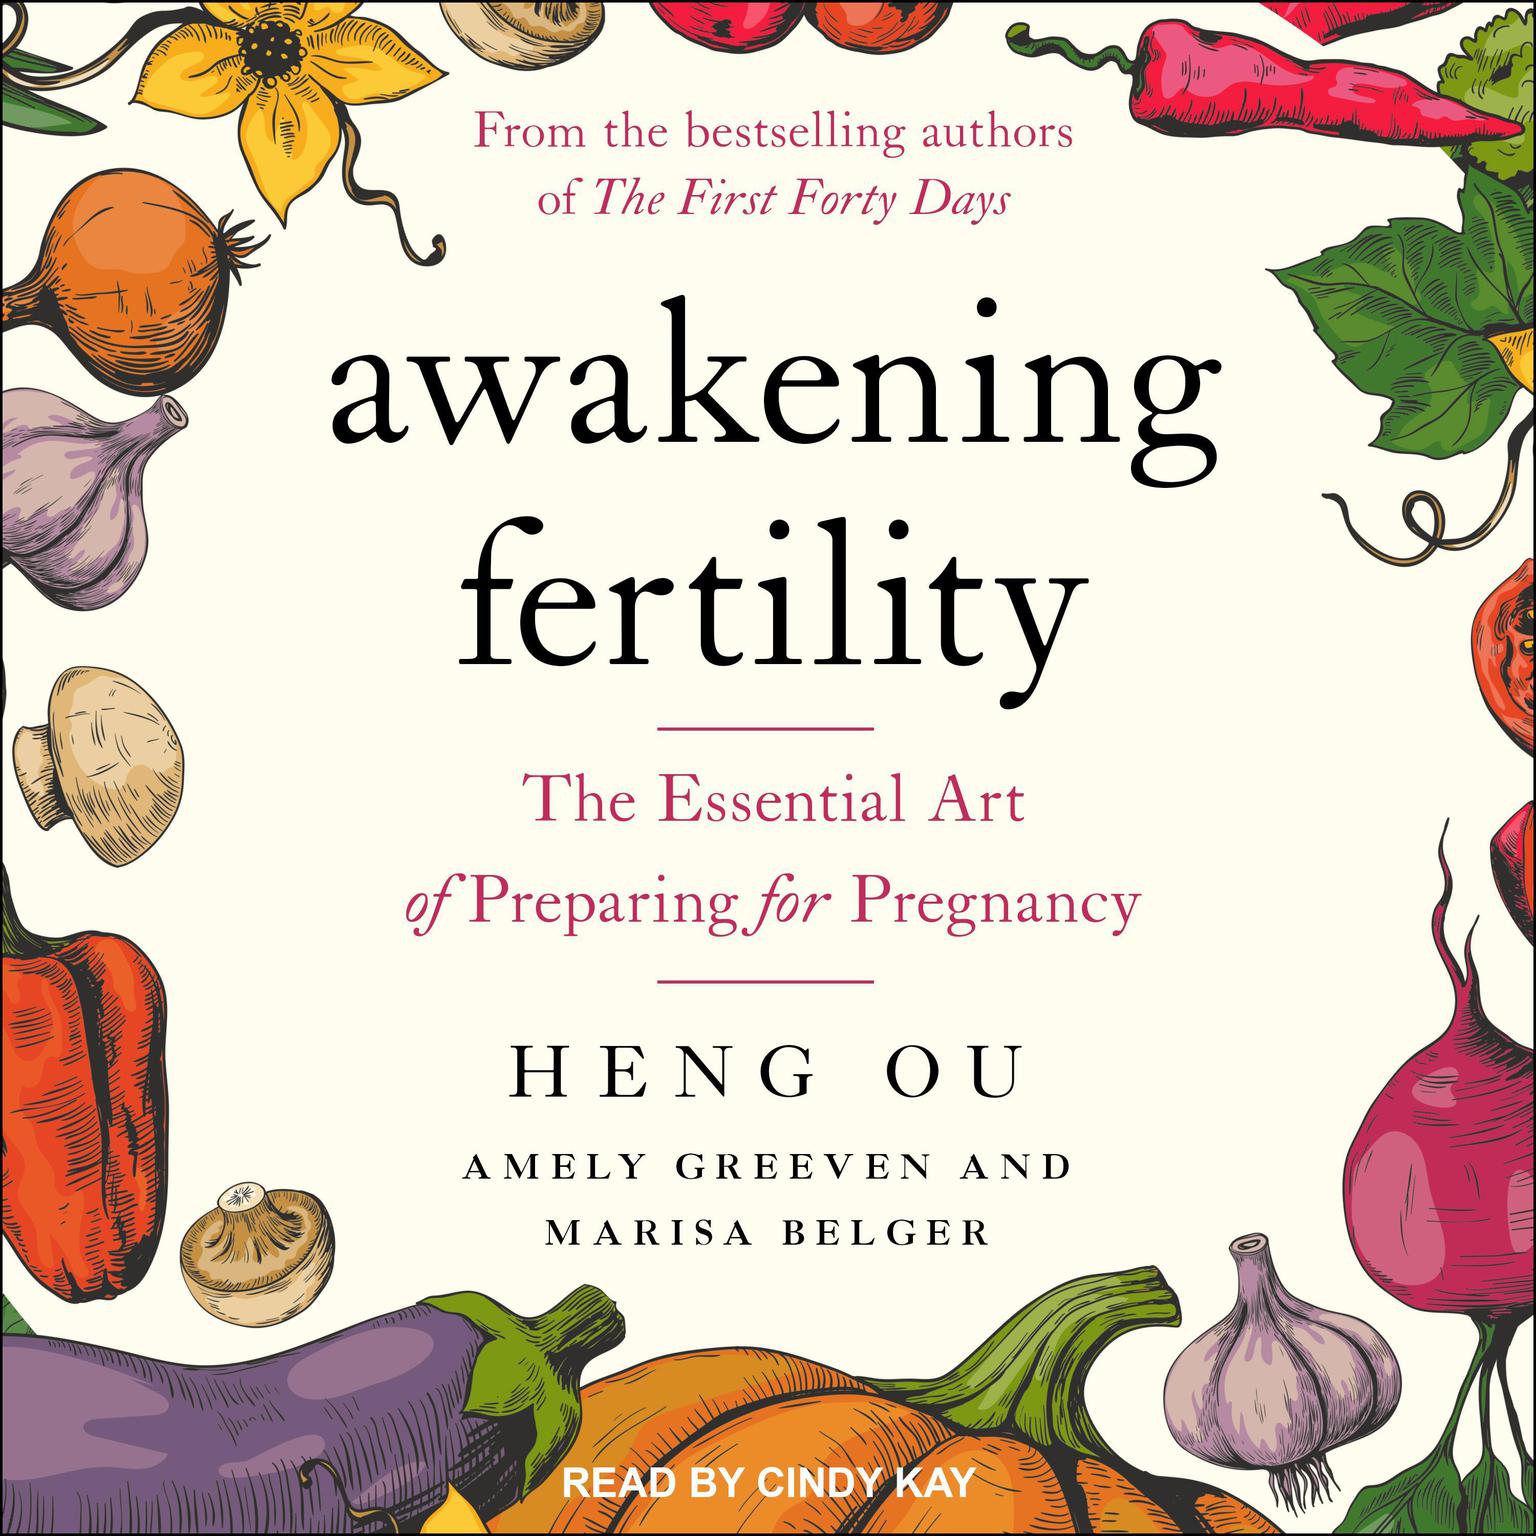 Awakening Fertility: The Essential Art of Preparing for Pregnancy Audiobook, by Amely Greeven